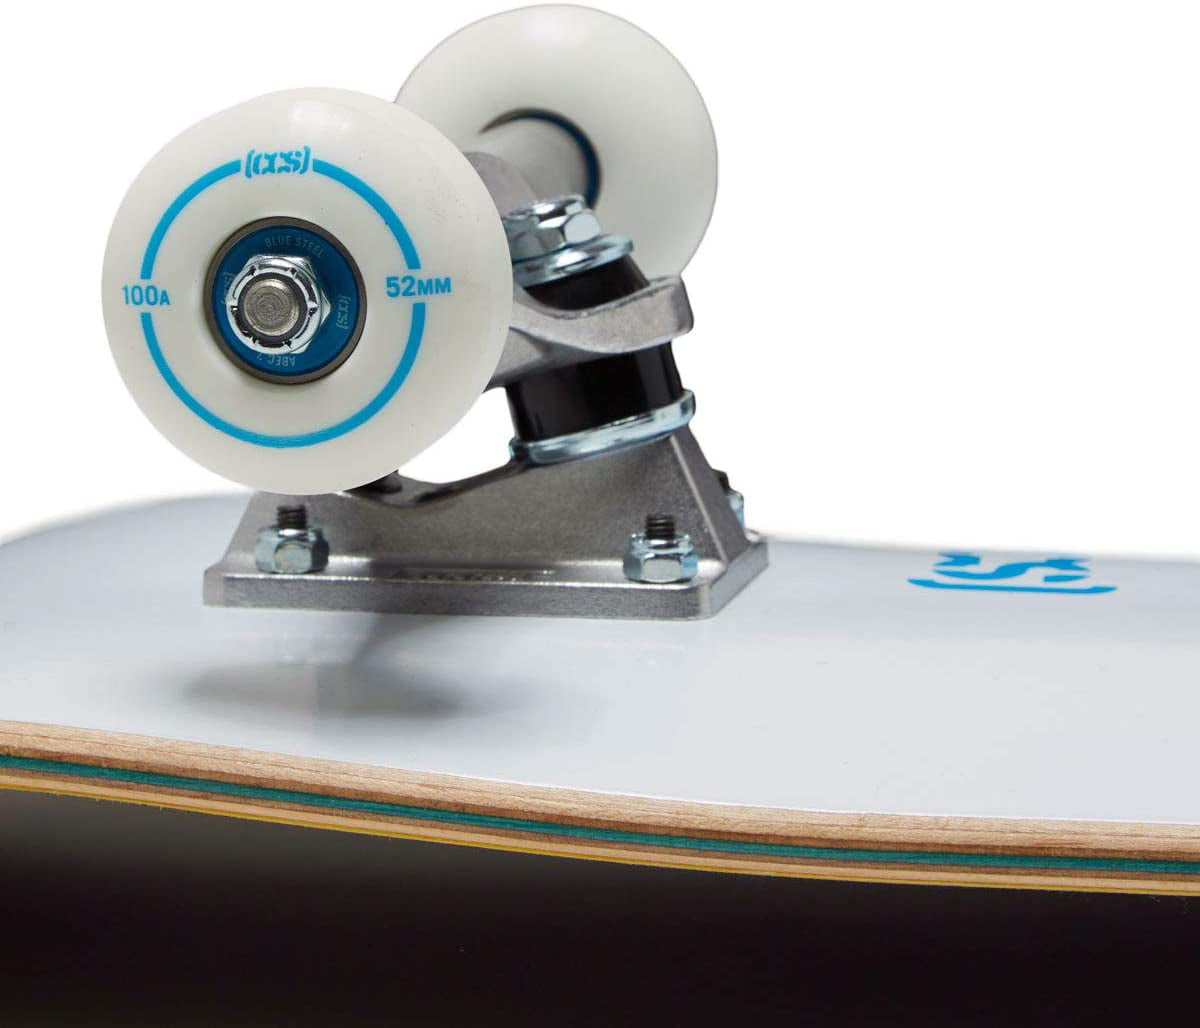 Fully Assembled with Skate Tool and Stickers Skateboard Complete Professional Grade CCS Maple Wood 